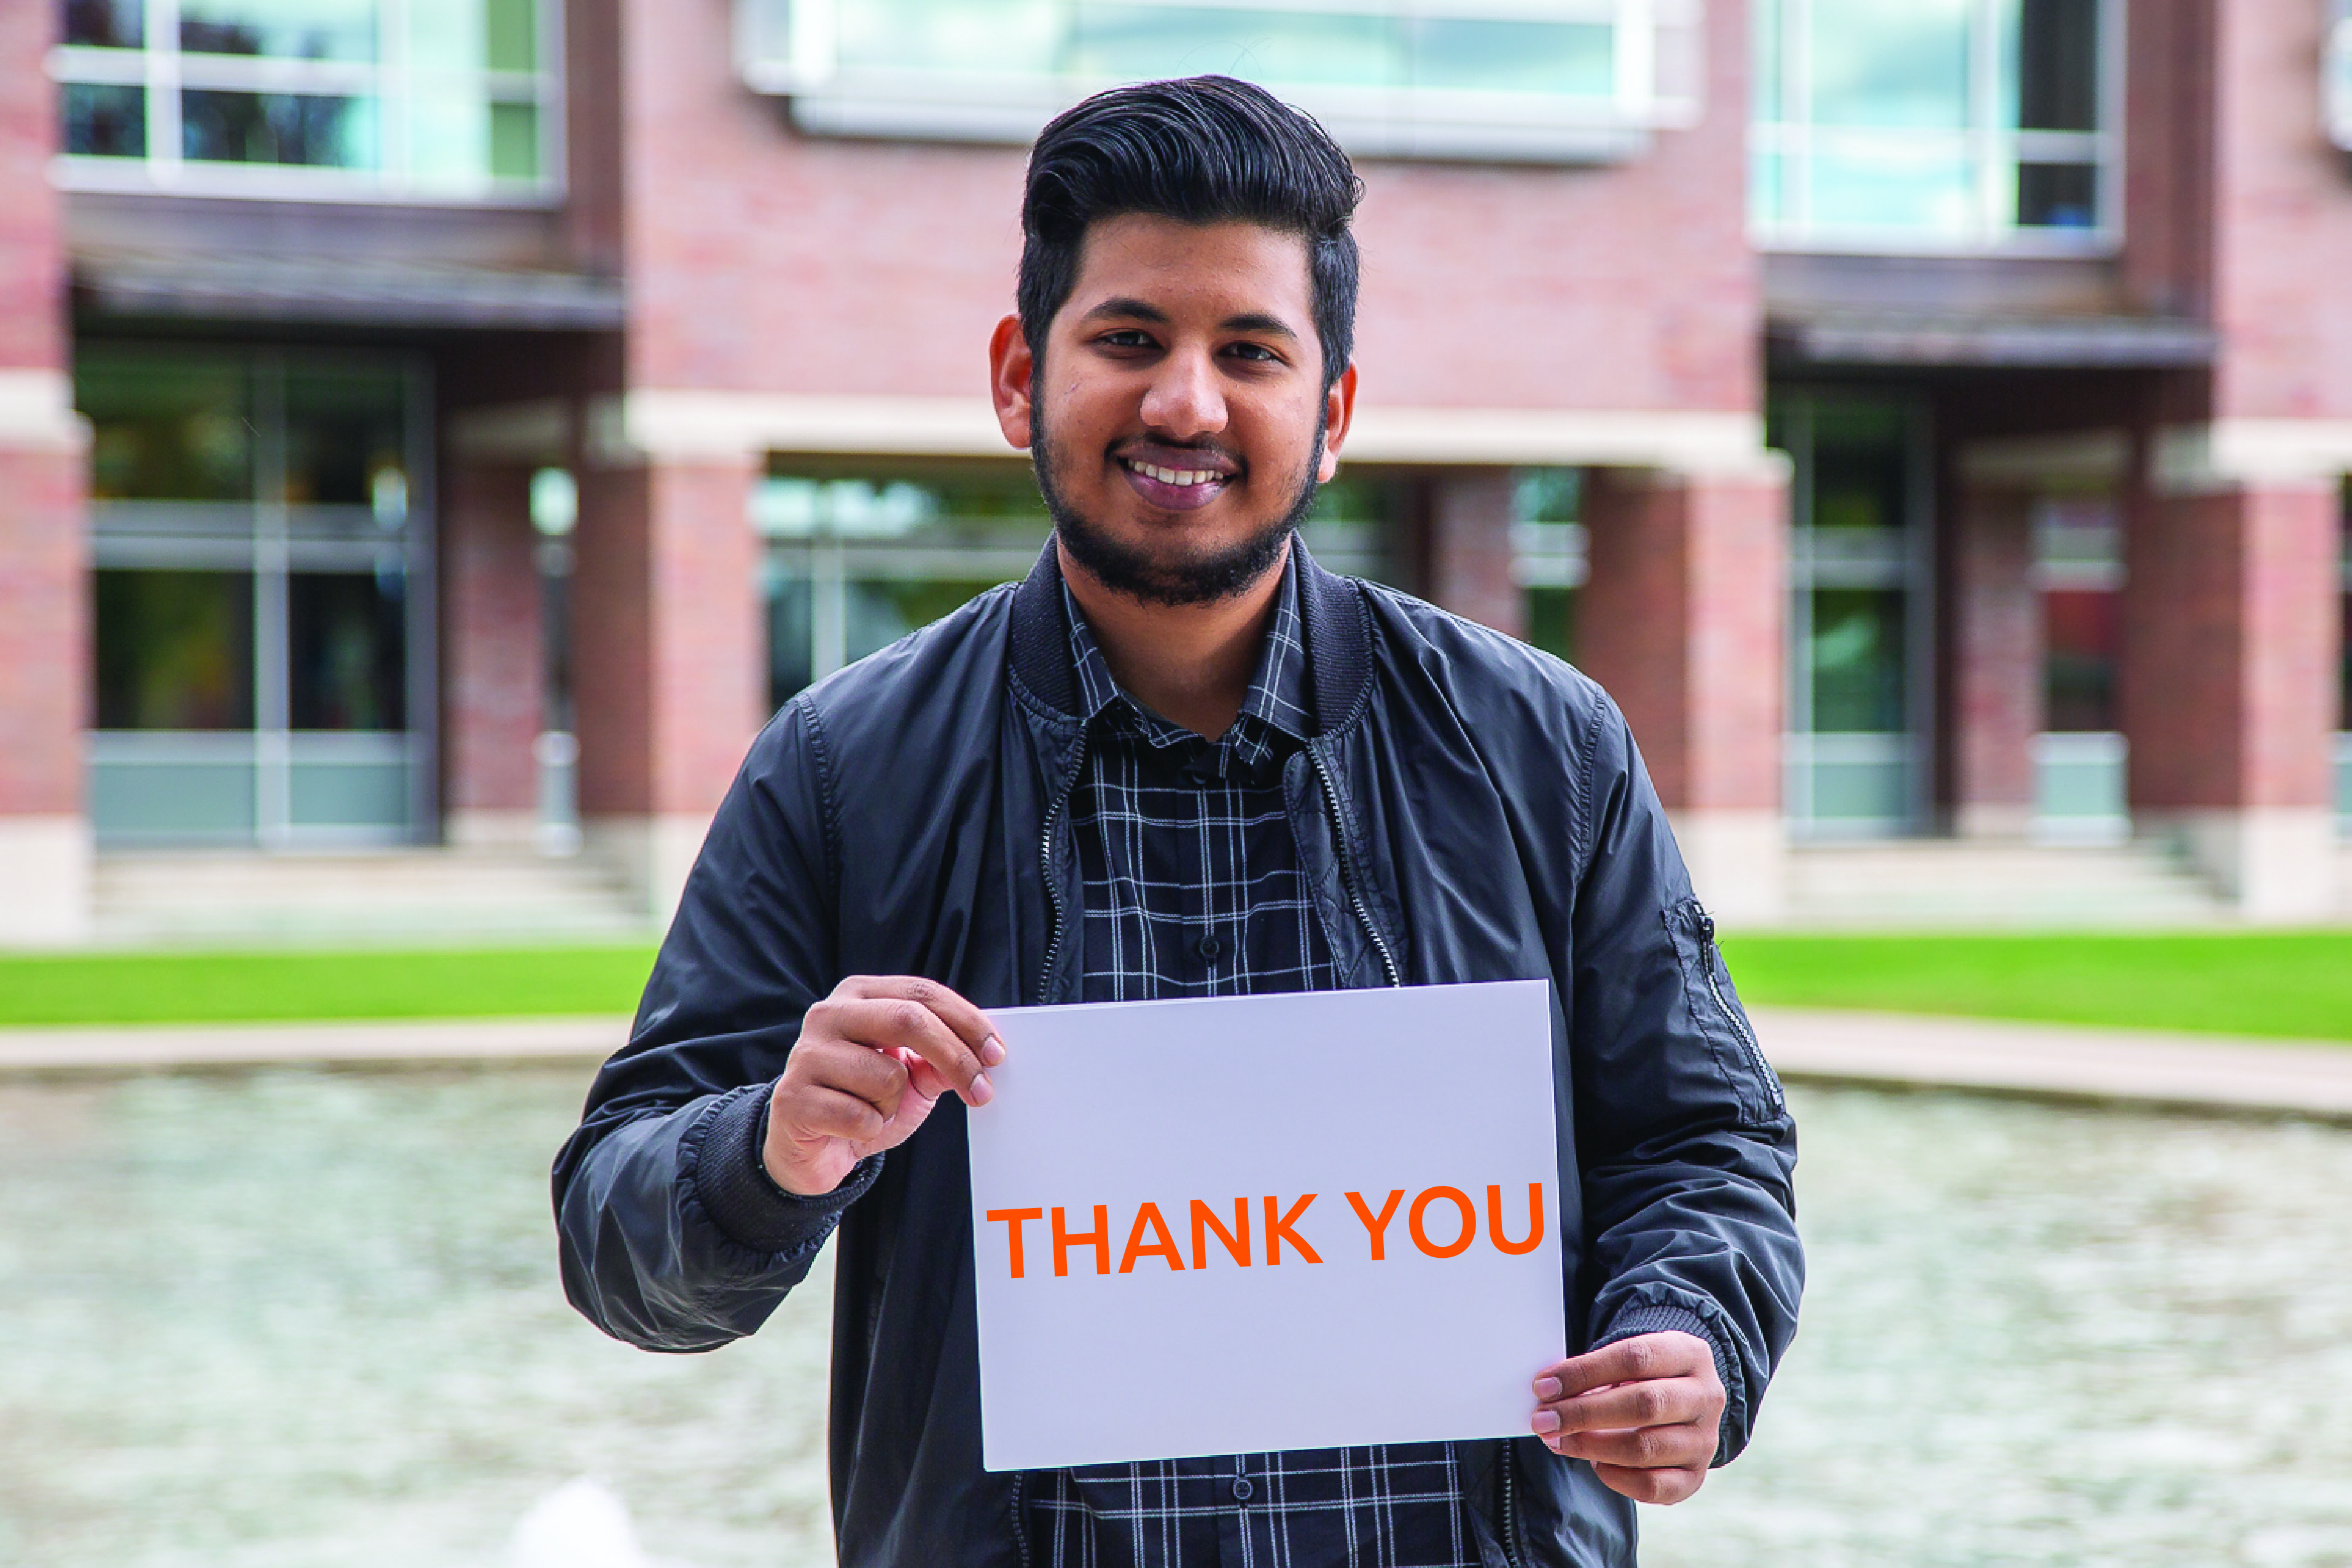 A male student holding a Thank You sign